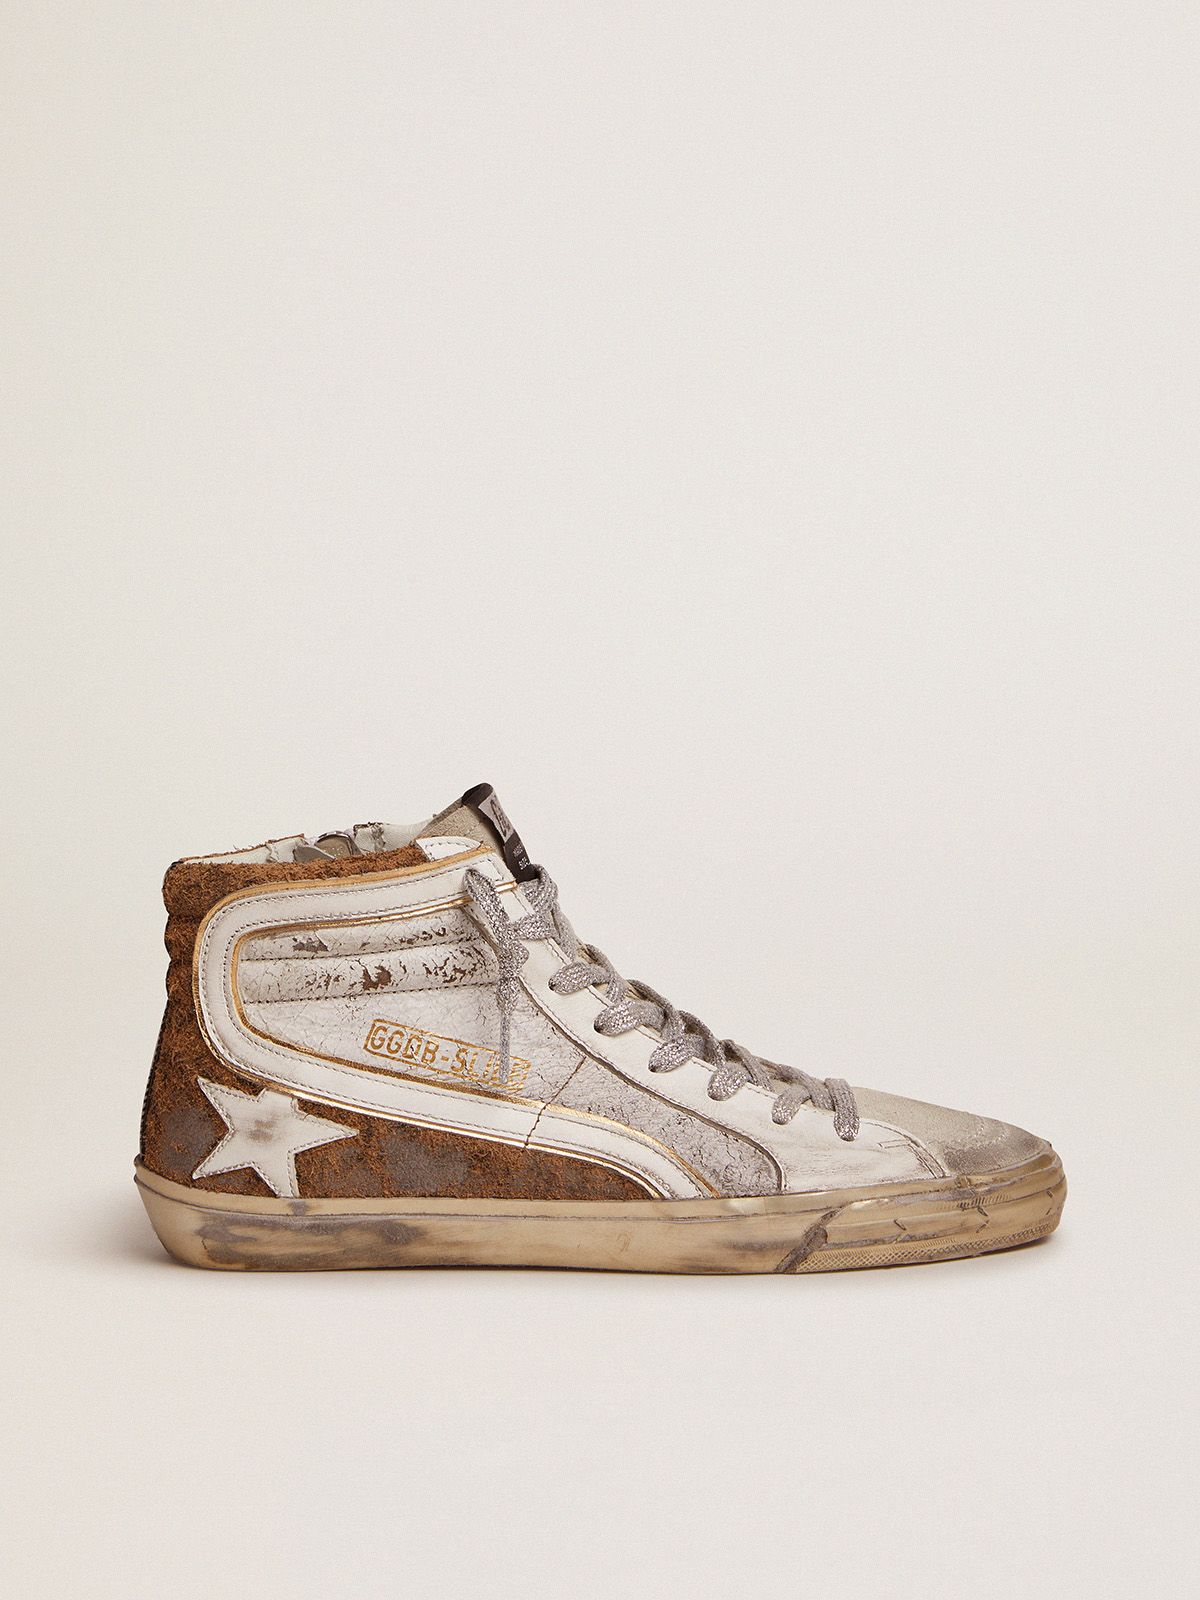 golden goose and in suede leather sneakers leopard-print crackle Slide